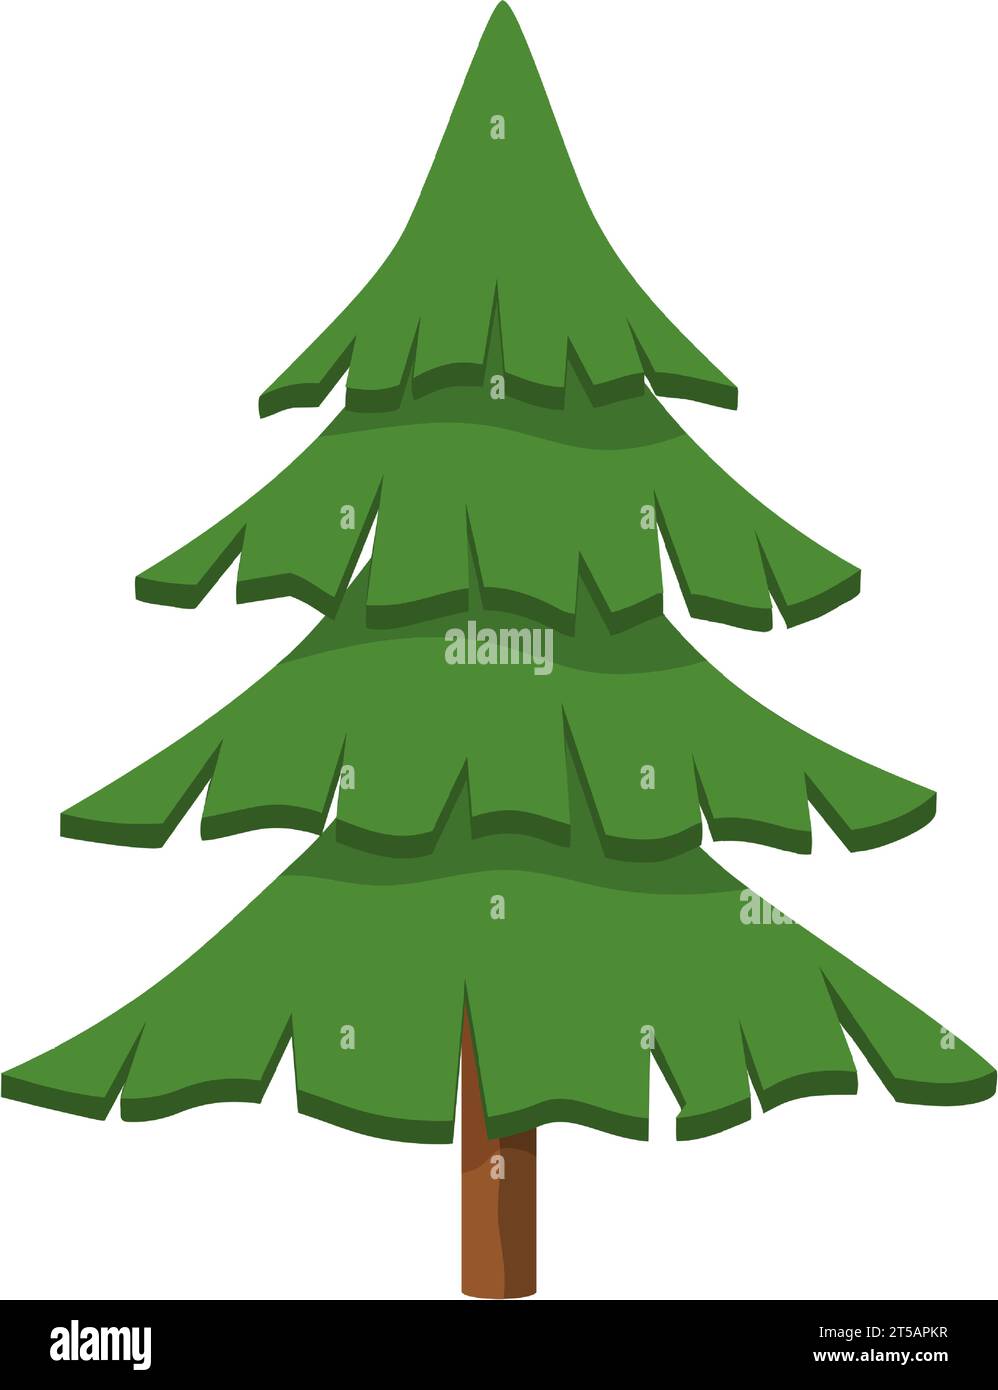 Green fluffy pine branch symbol of new year Vector Image